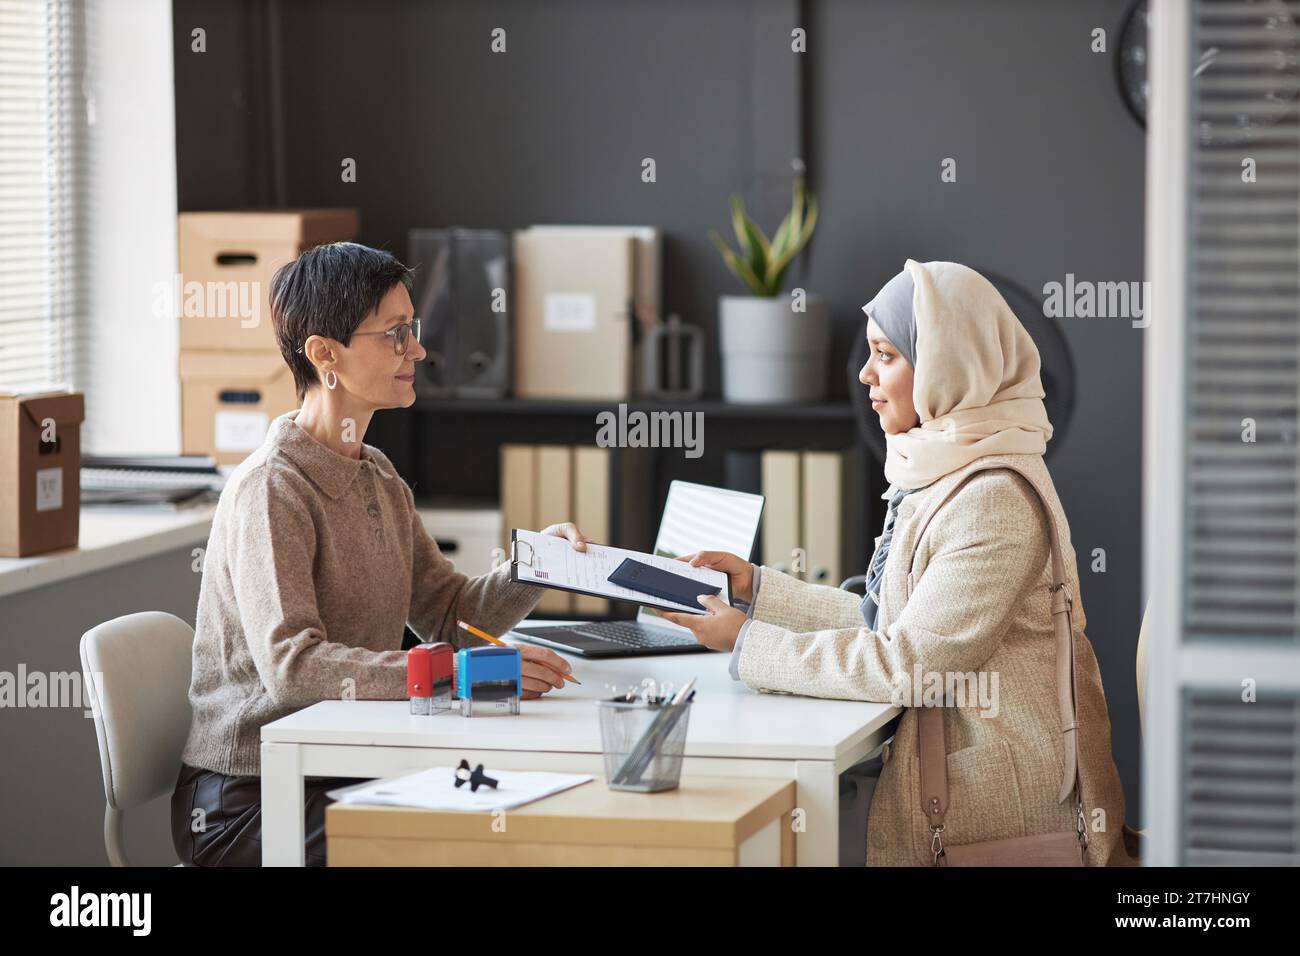 Side view of mature manager of visa application center and young Muslim female applicant wearing hijab and quiet luxury attire Stock Photo